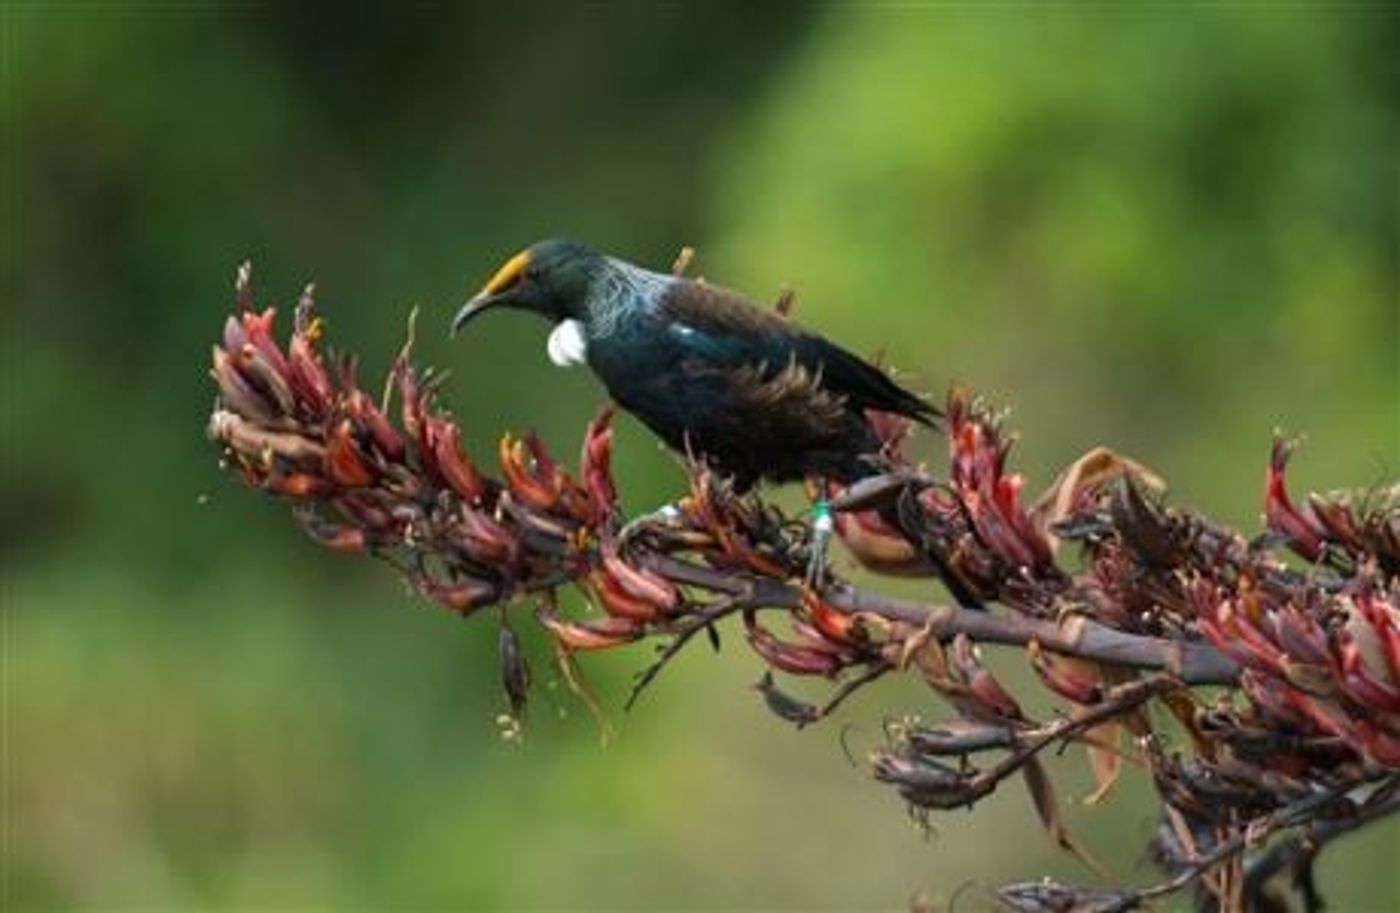 A songbird with black, blue, and yellow feathers perched on a branch with red flowers, set against a blurred green background of trees